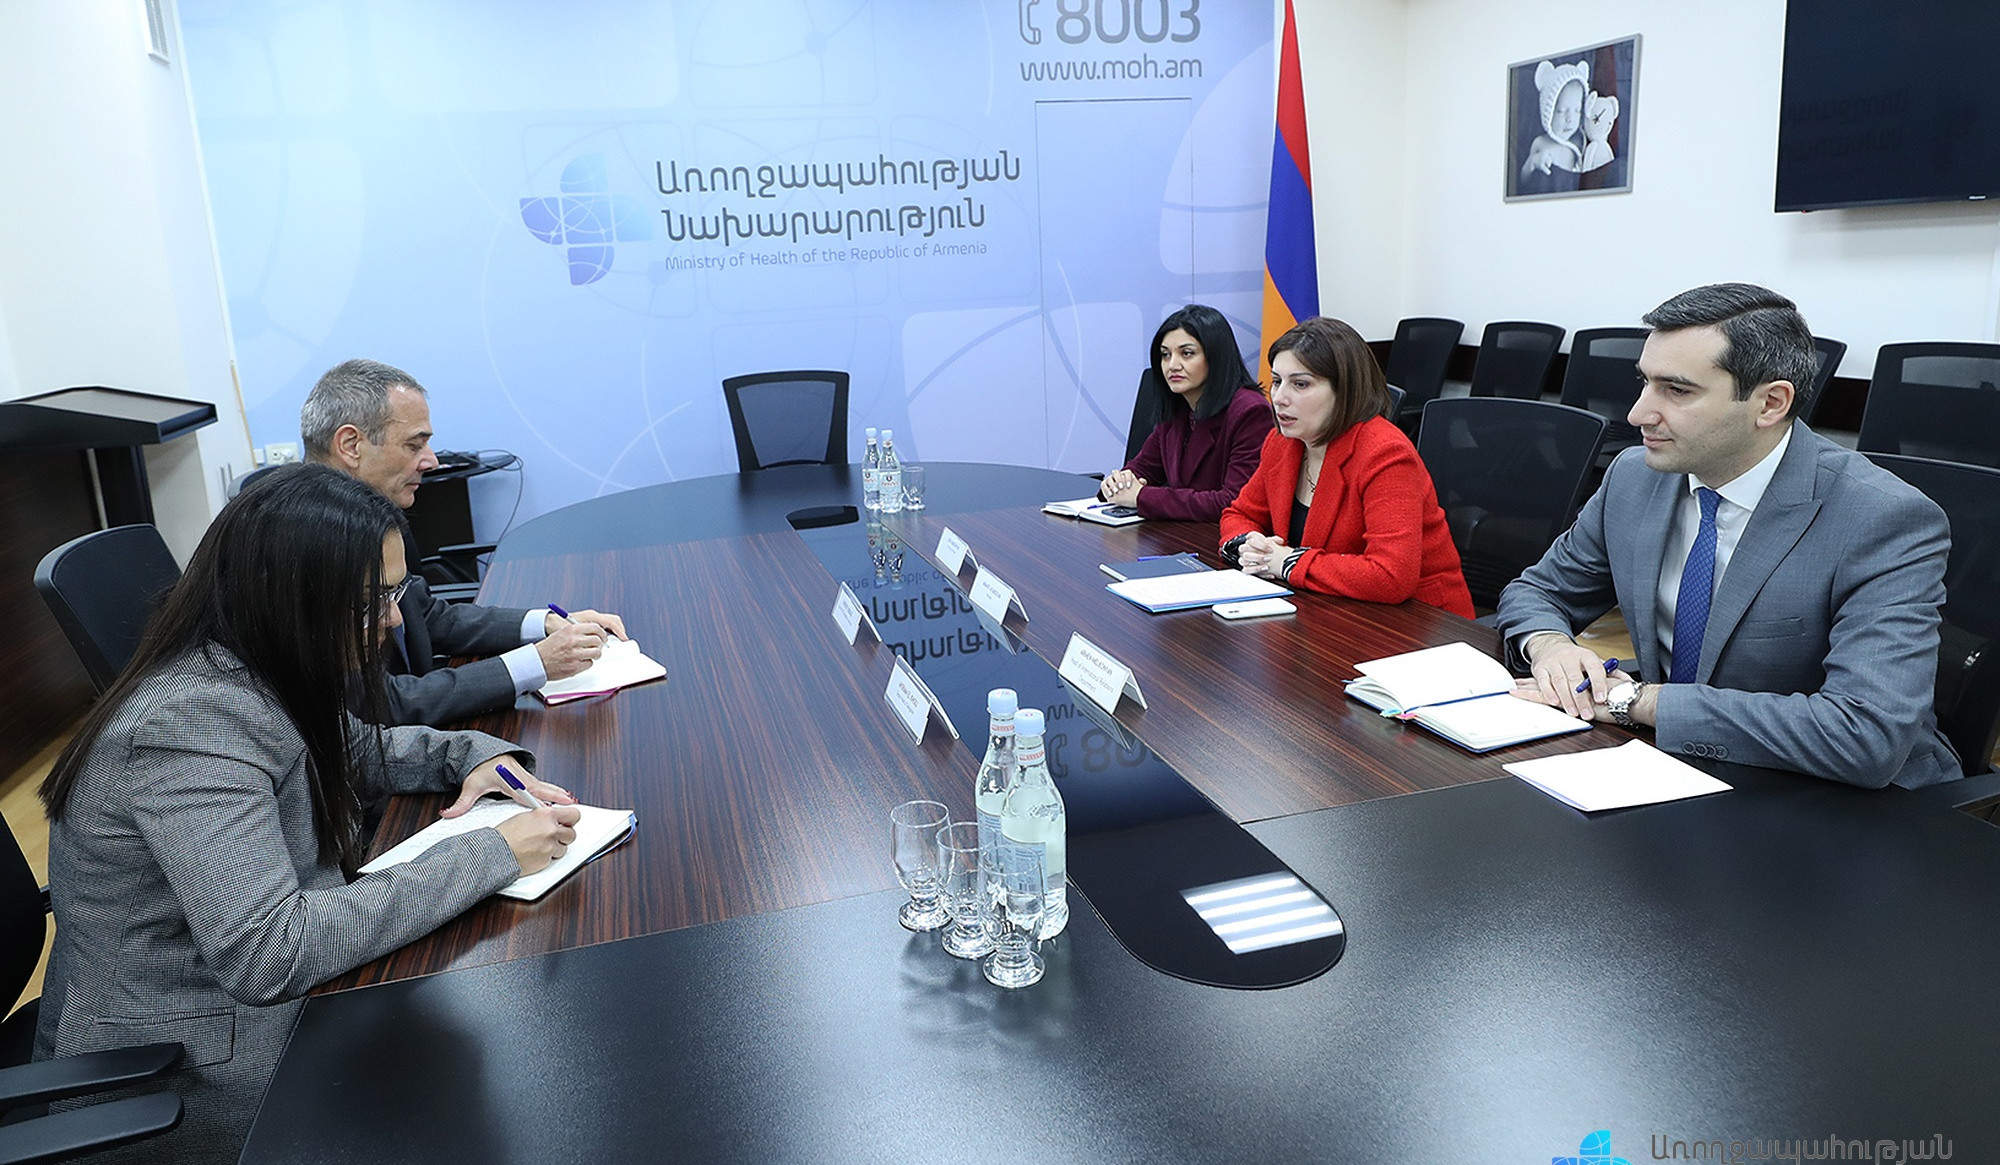 Anahit Avanesyan and Thierry Ribaux discussed possibility of transporting patients from Artsakh, delivering medicine and baby food